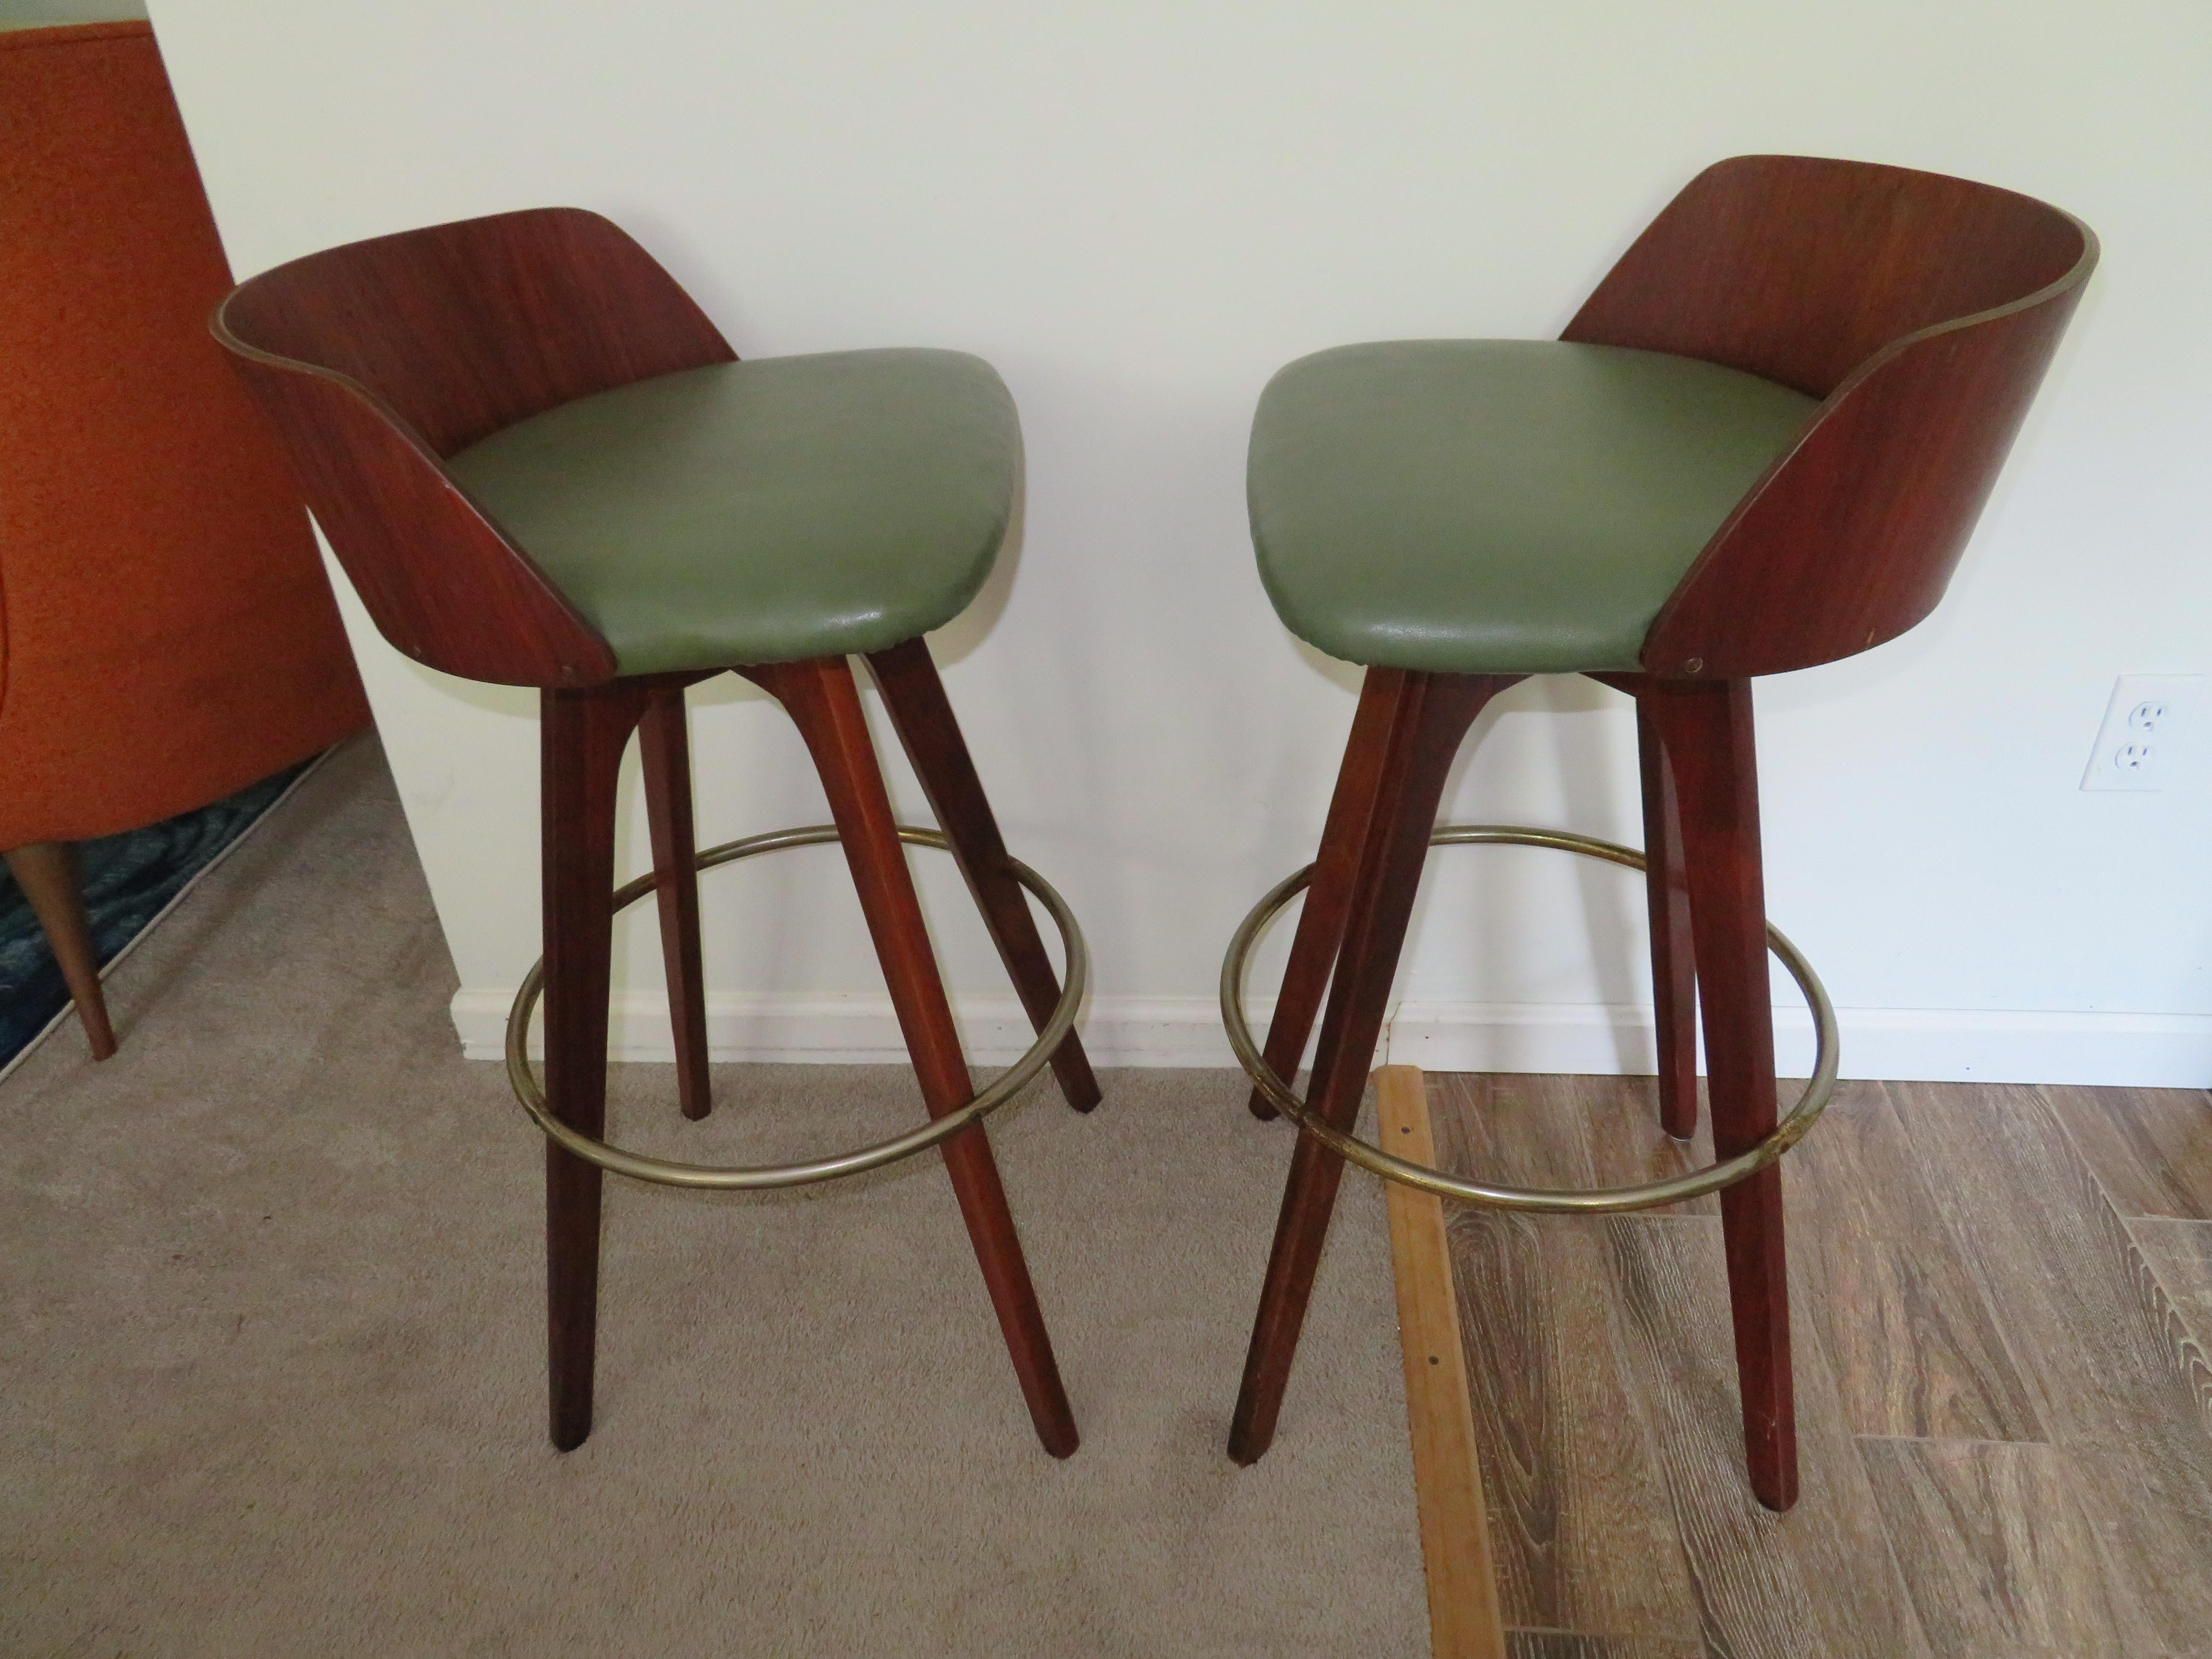 Handsome pair of walnut barrel back bar stools. Bent walnut backs and solid legs created by Chet Beardsley. Brass plated foot rings show some normal wear. These are quite comfortable to sit in and they do swivel.